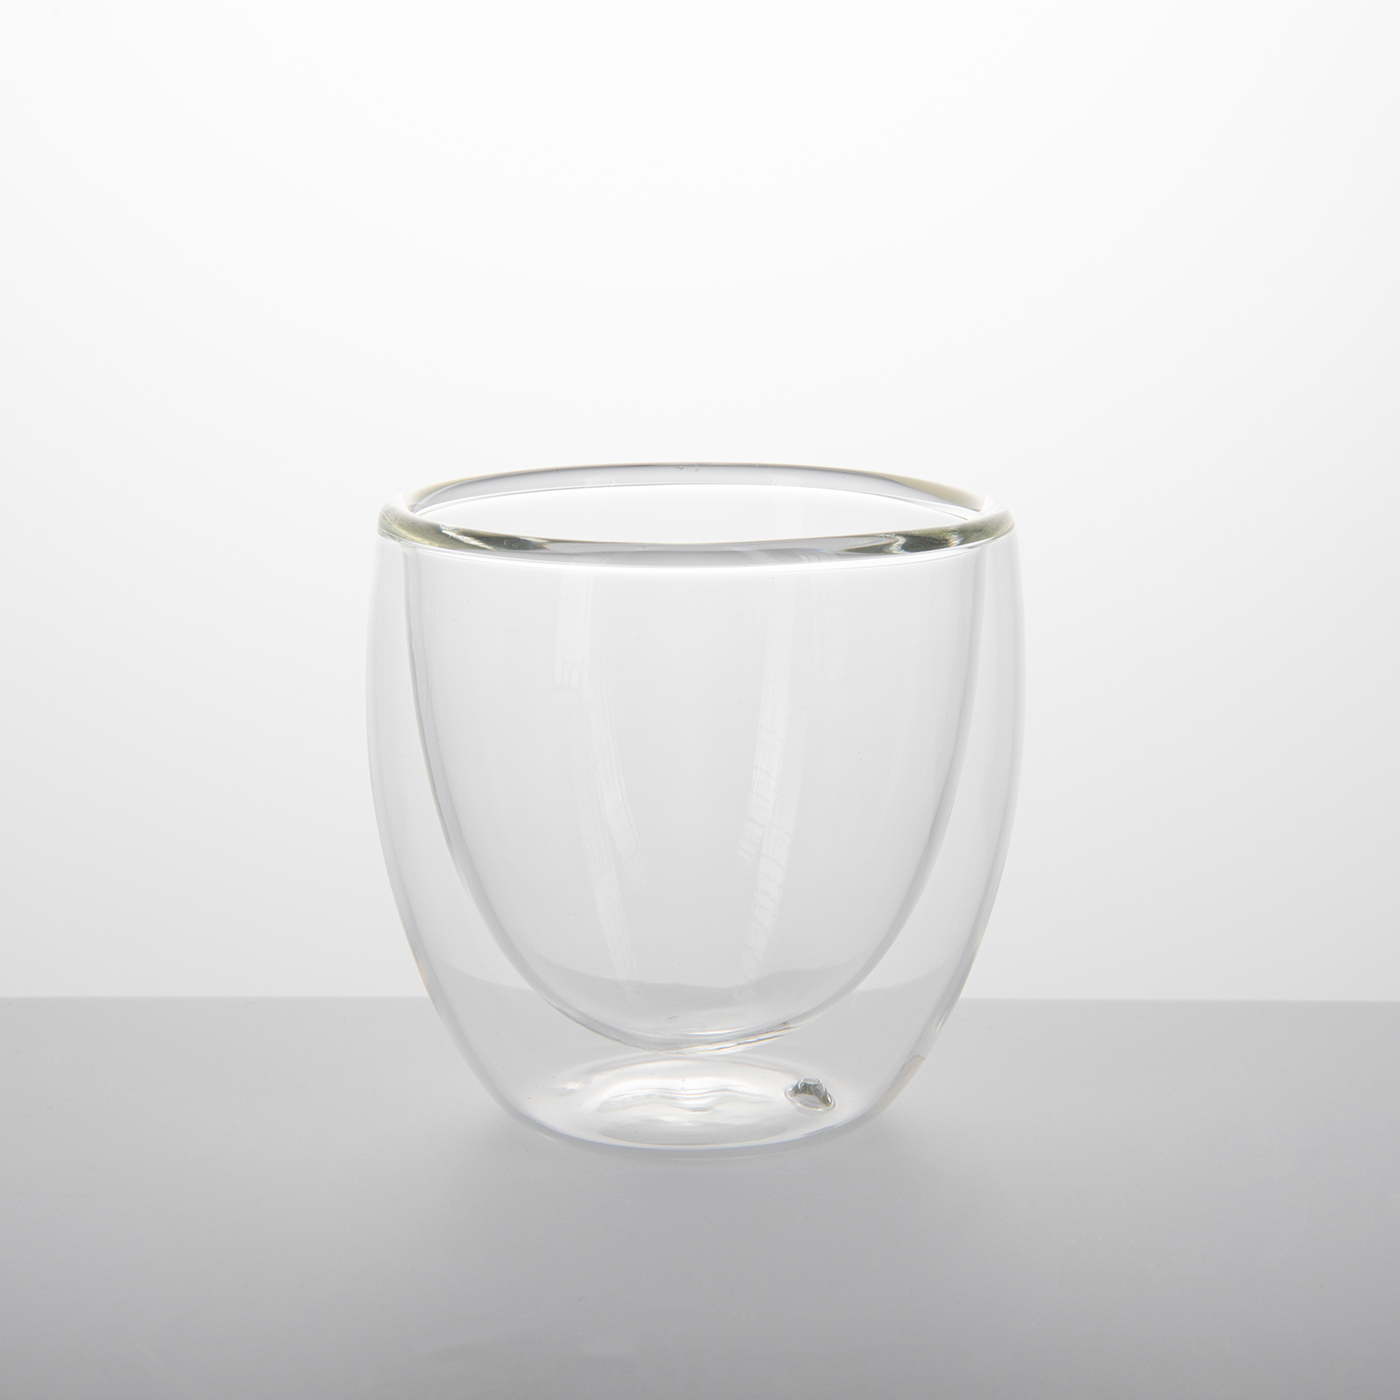 3 oz. Transparent Double-layer Glass Coffee Cup4